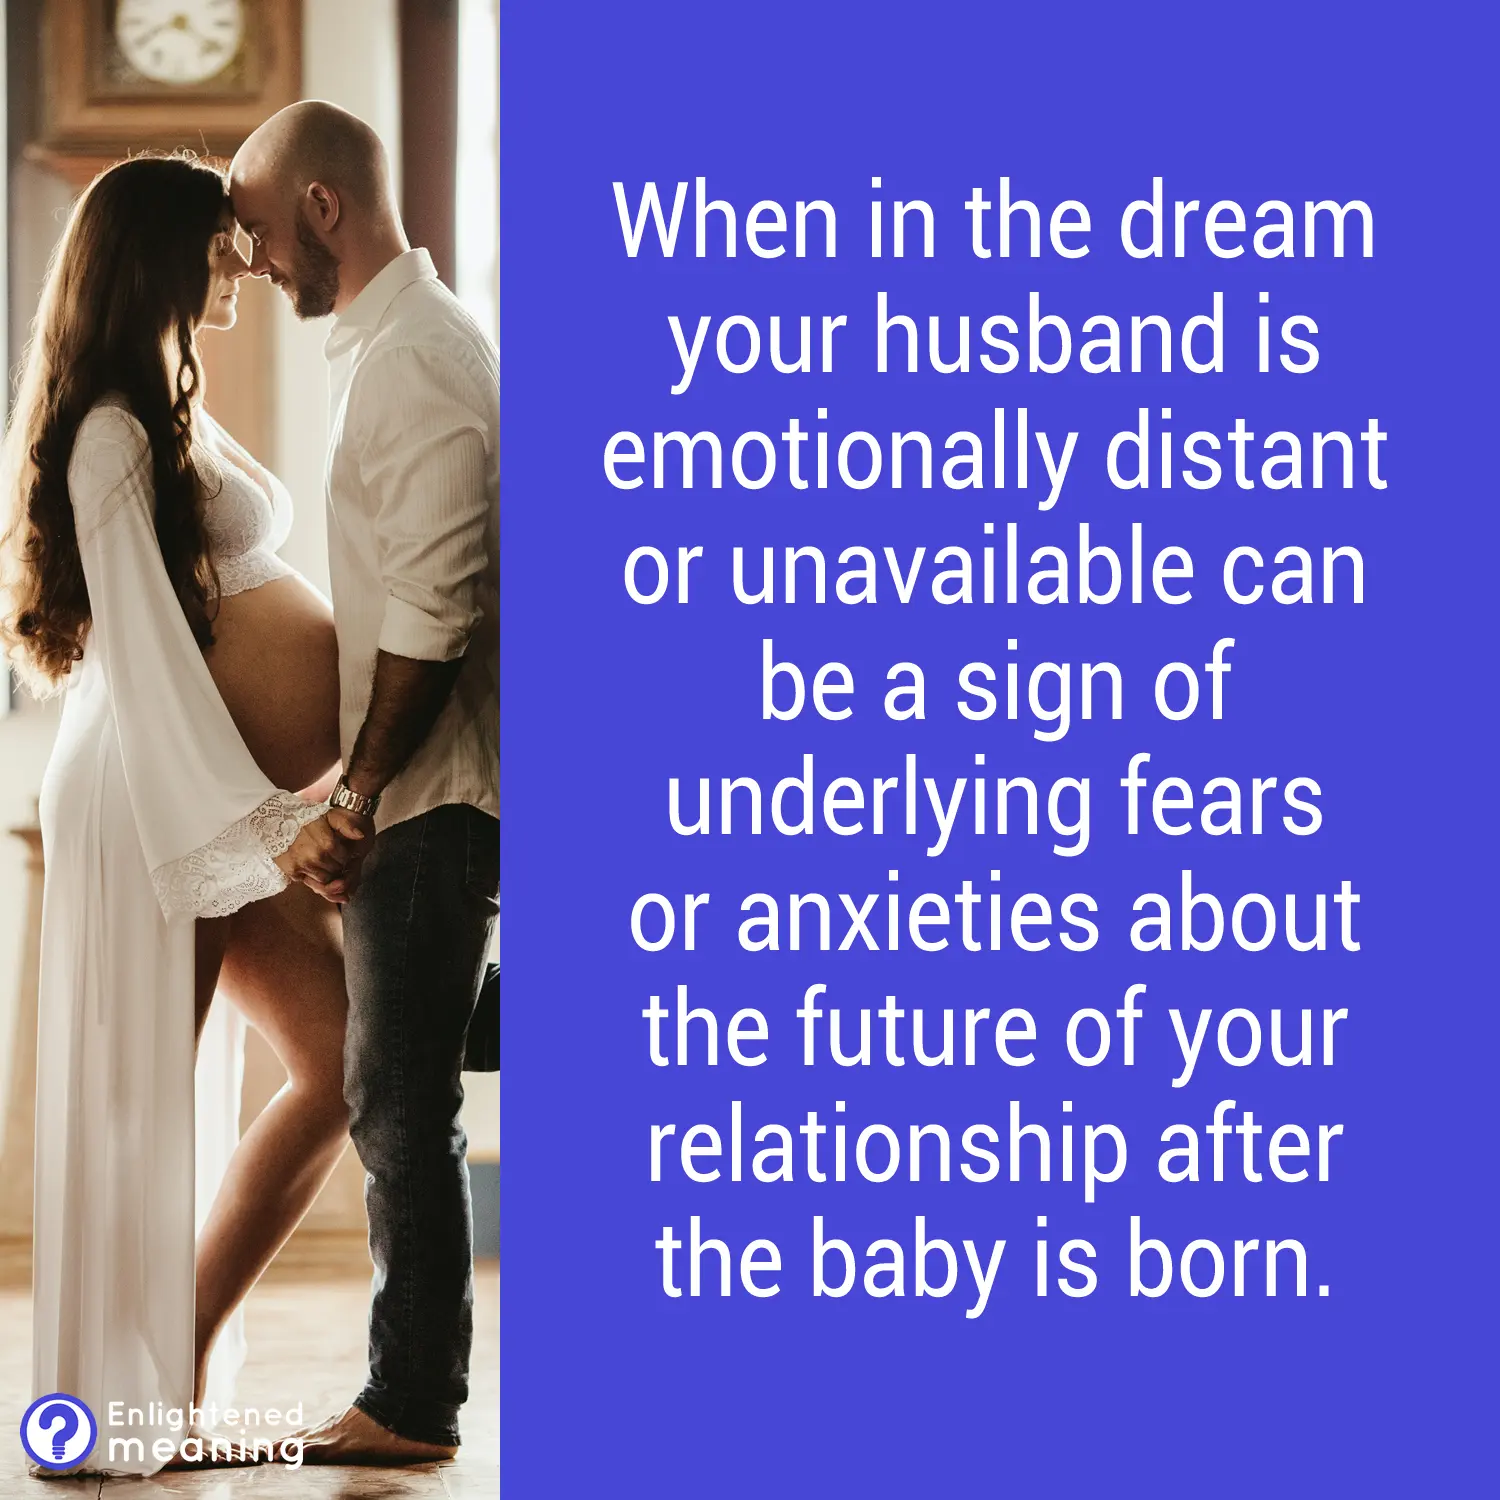 Why do women have bad dreams during pregnancy